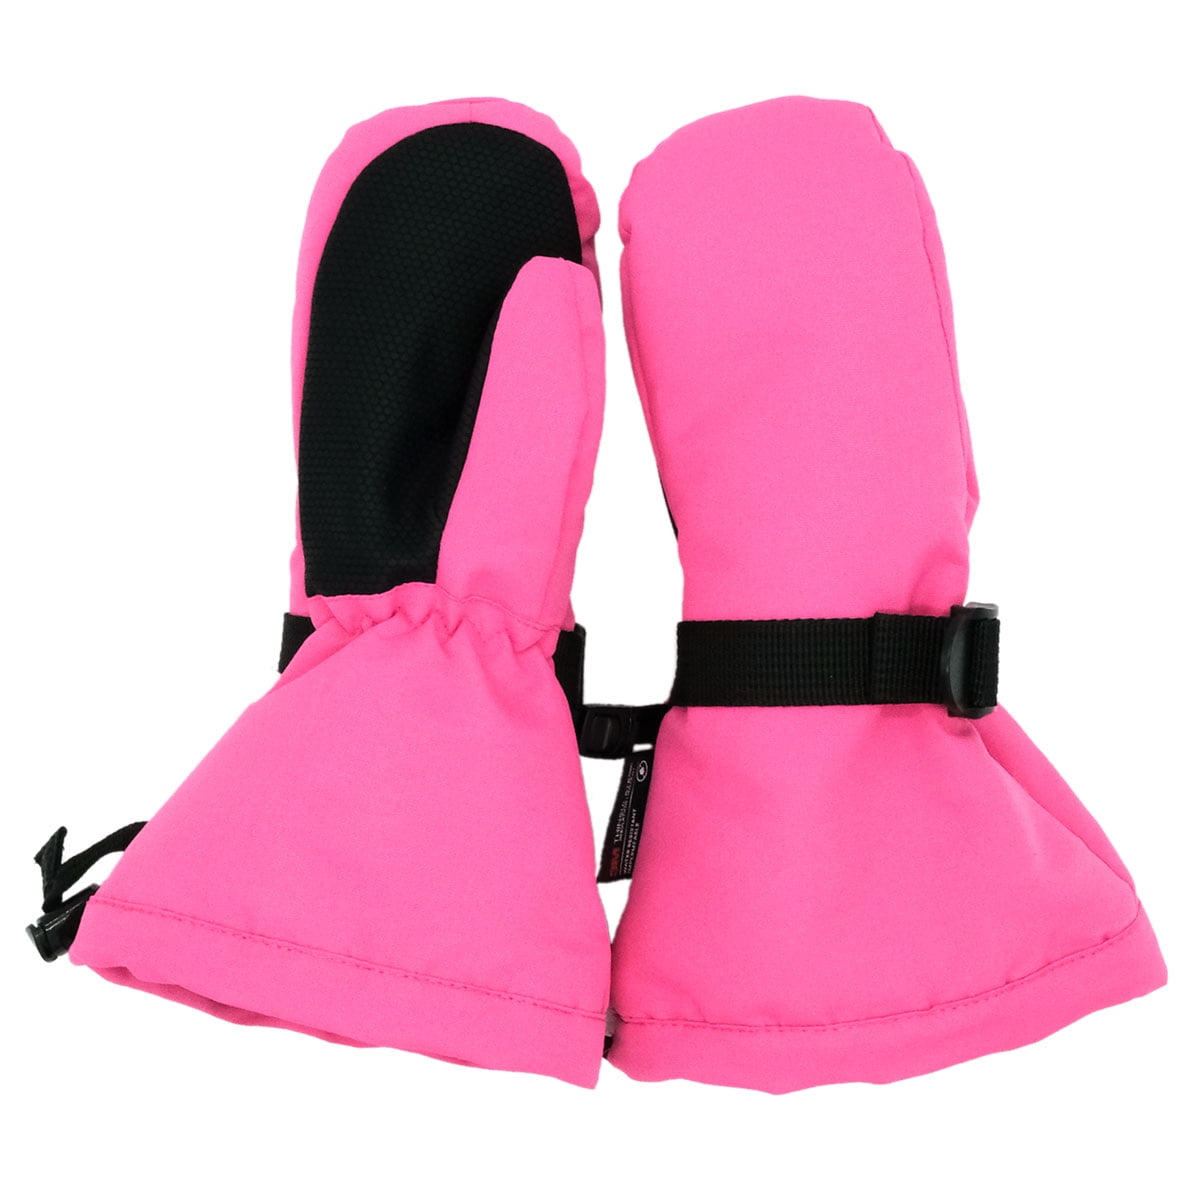 Waterproof Stay-on Winter Snow and Ski Mittens Fleece-Lined for Baby Toddler Girls and Boys